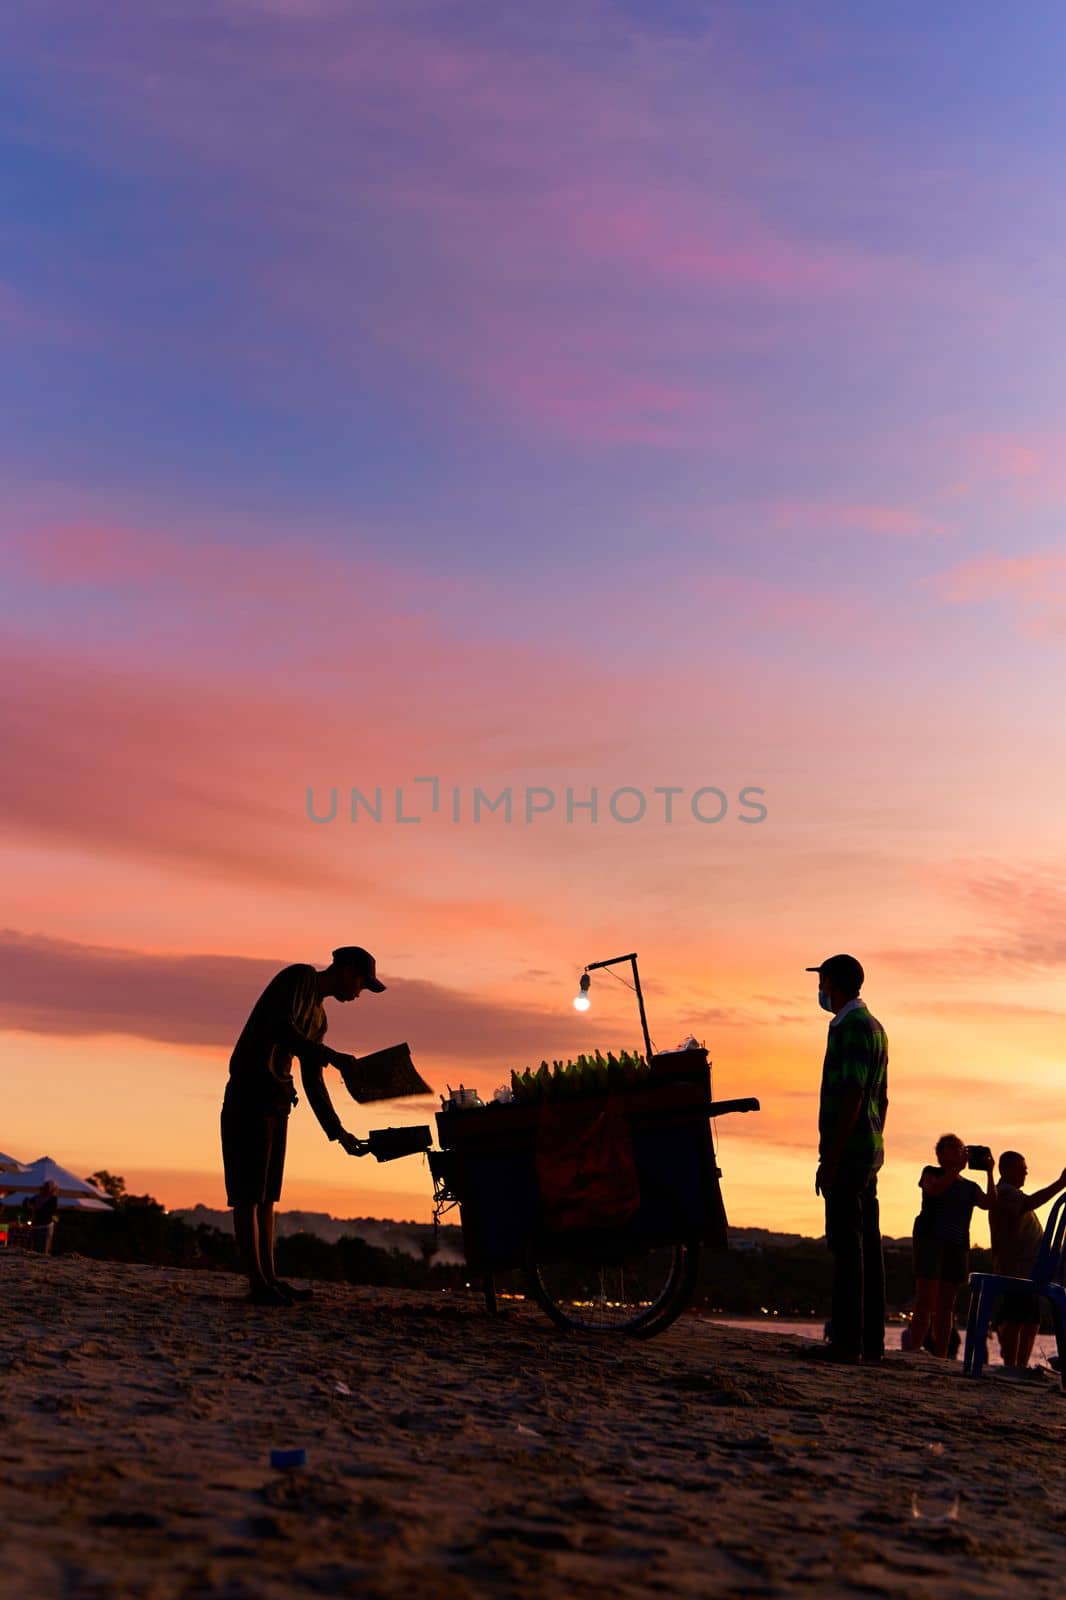 An evening silhouette of a vendor and his grill cart on the beach. Evening market on the beach by Try_my_best